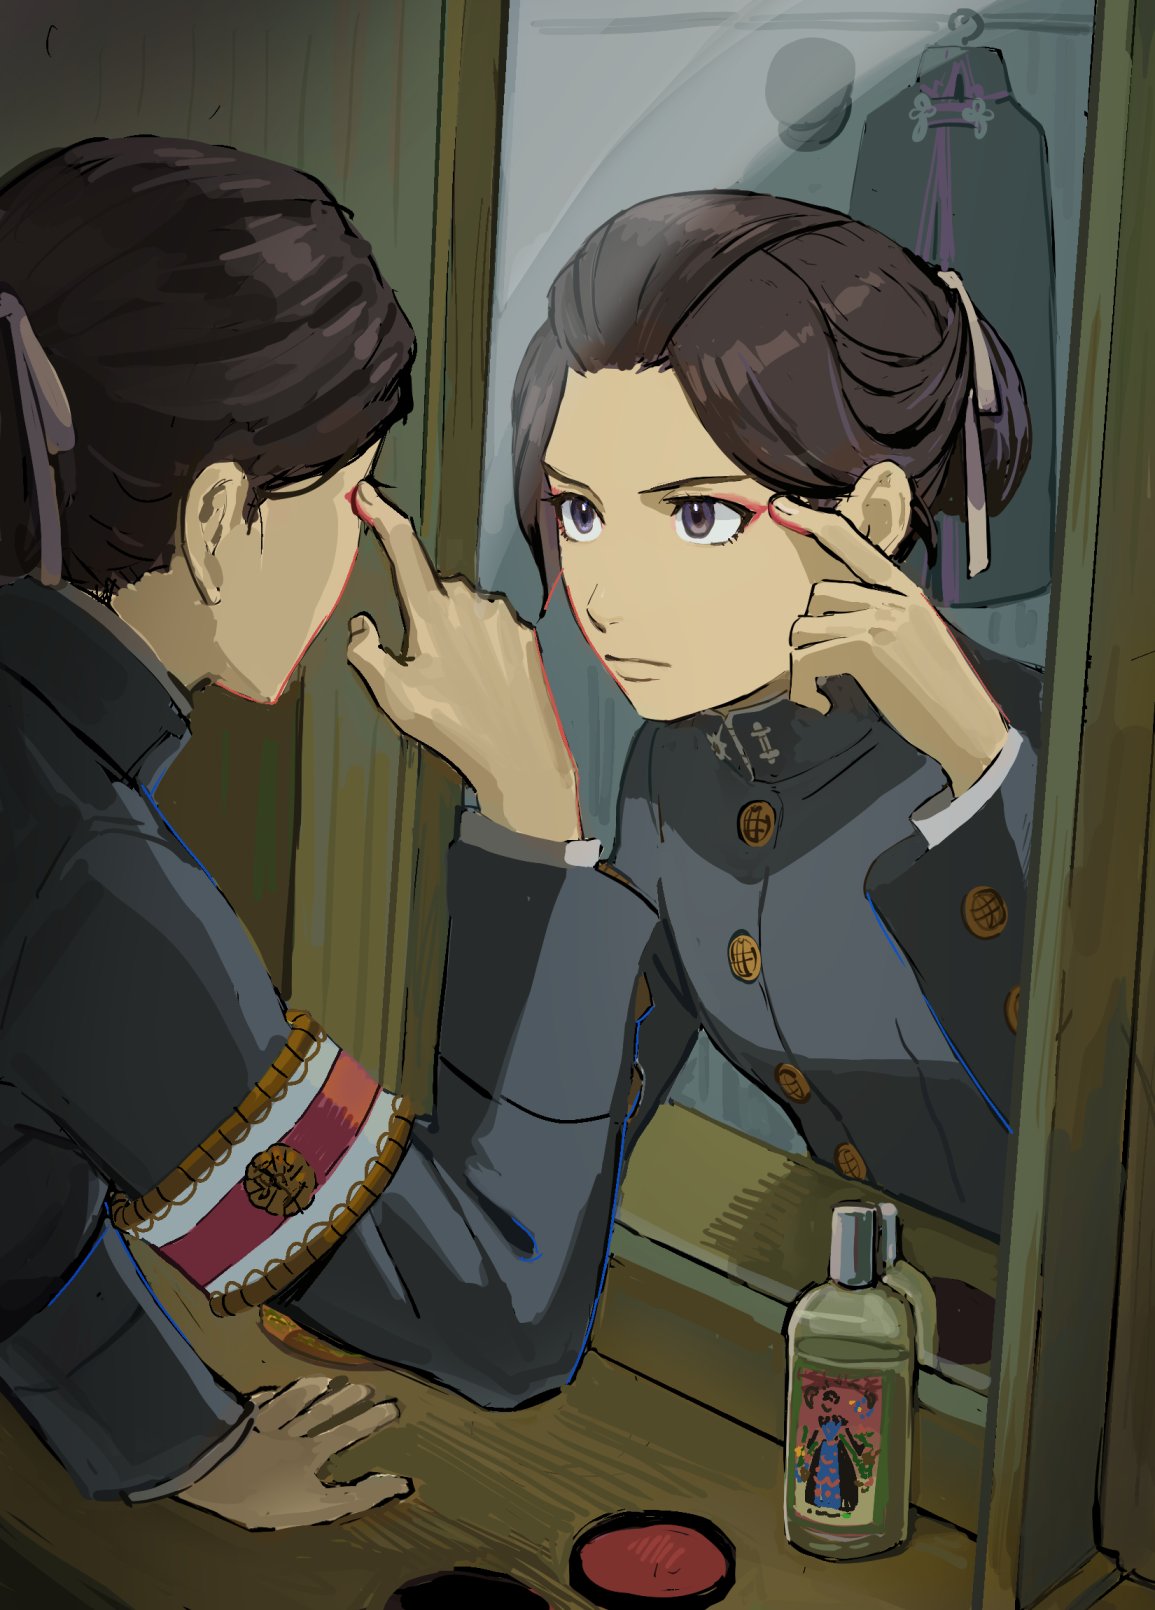 0shlkatsu 1girl ace_attorney applying_makeup black_suit brown_eyes brown_hair buttons closed_mouth commentary_request eyeshadow highres indoors looking_at_mirror makeup mirror red_eyeshadow reflection short_hair suit susato_mikotoba the_great_ace_attorney the_great_ace_attorney_2:_resolve